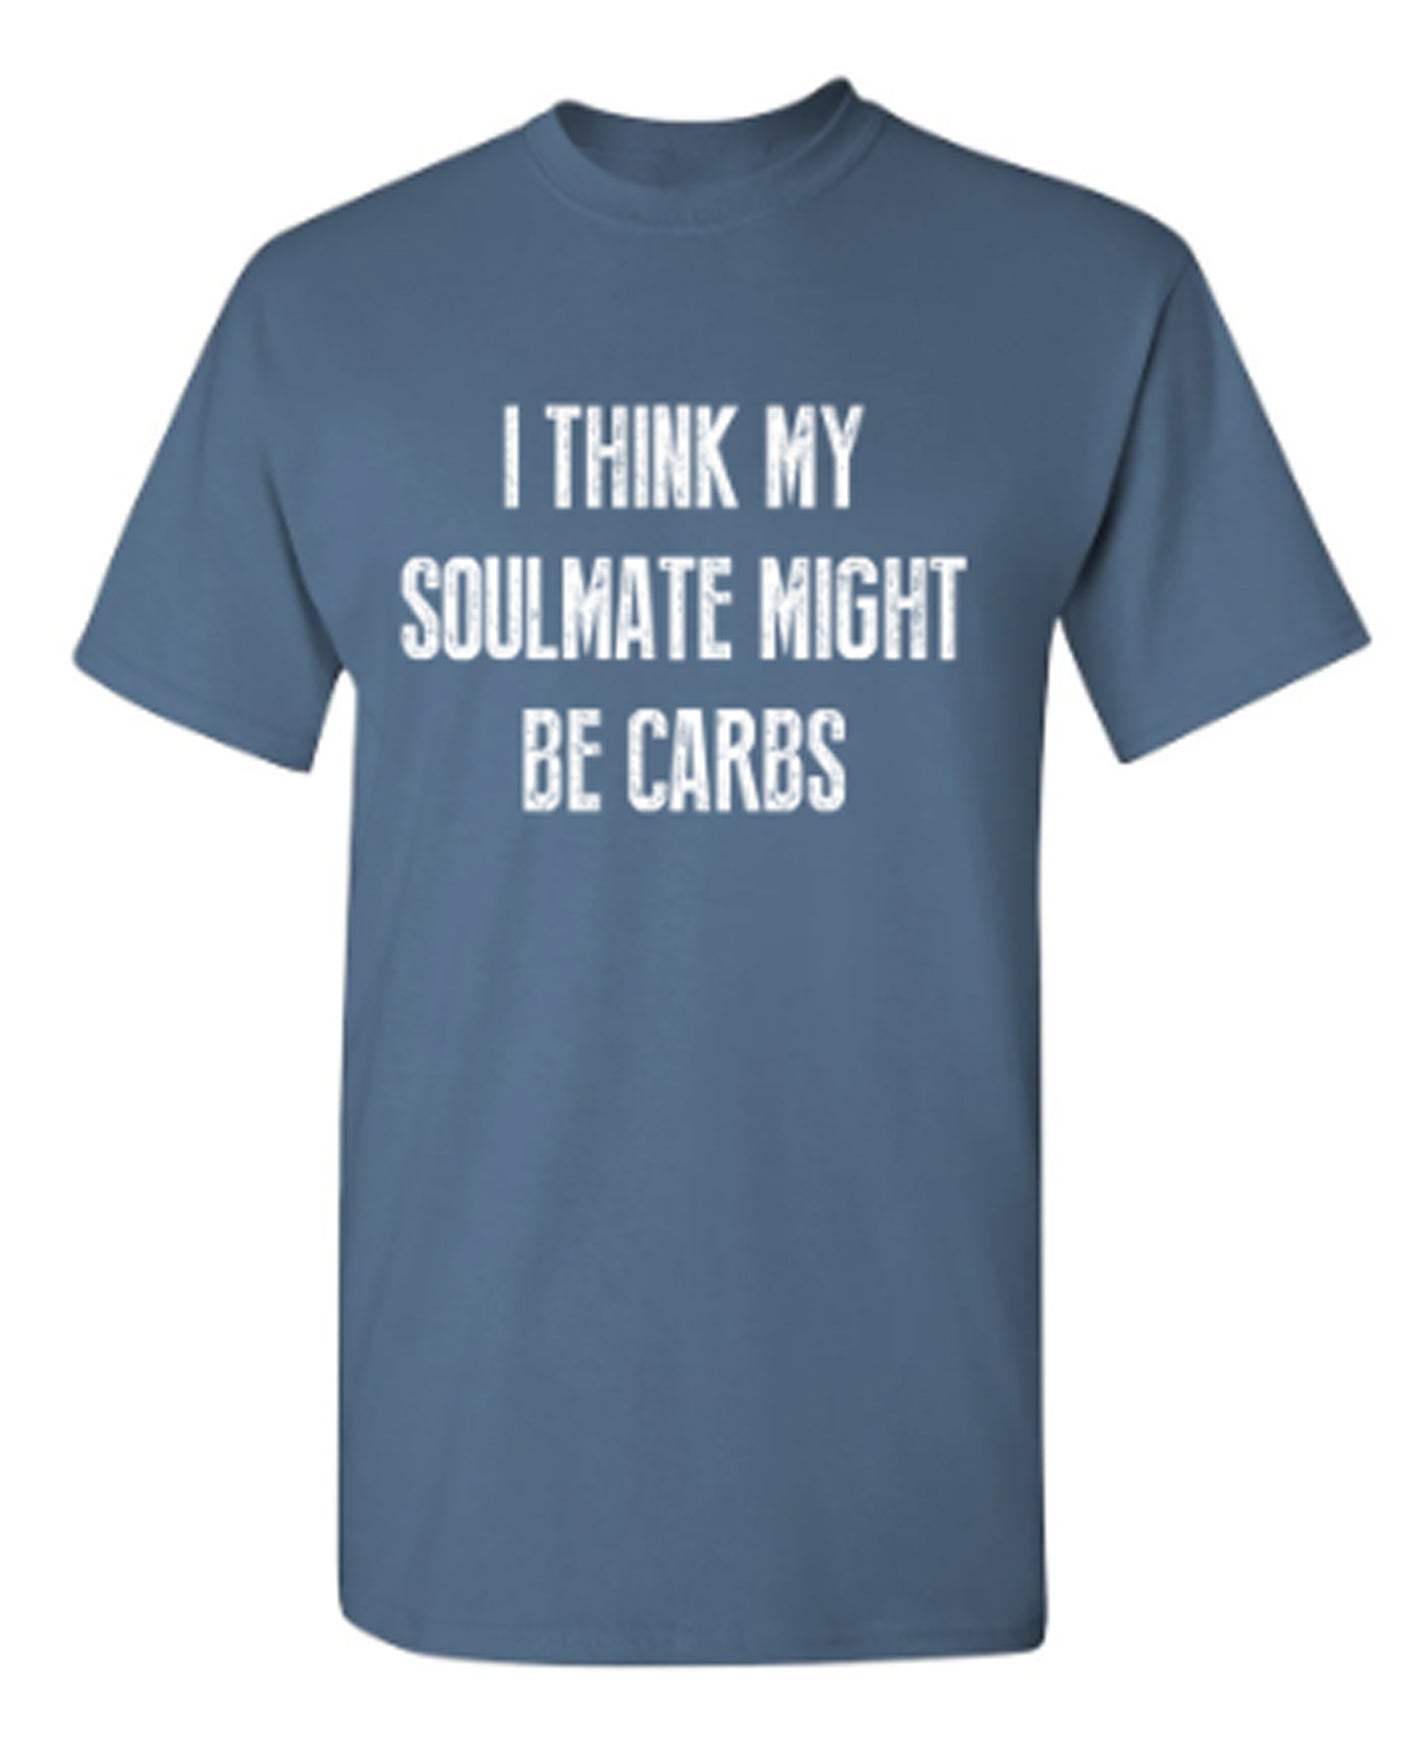 I Think My Soulmate Might Be Carbs - Funny T Shirts & Graphic Tees